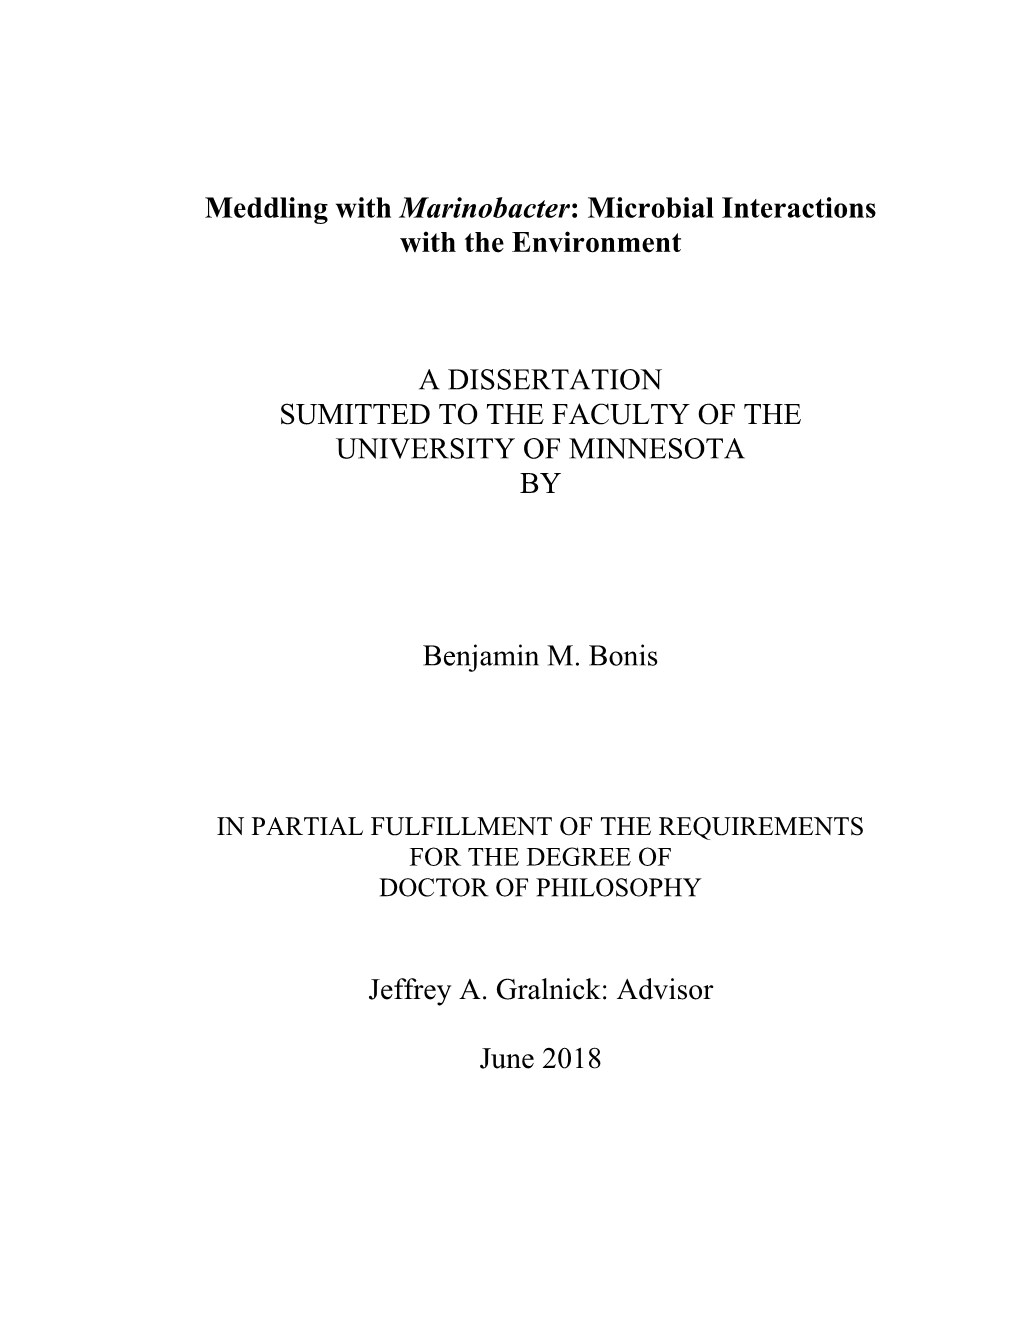 Meddling with Marinobacter: Microbial Interactions with the Environment a DISSERTATION SUMITTED to the FACULTY of the UNIVERSITY